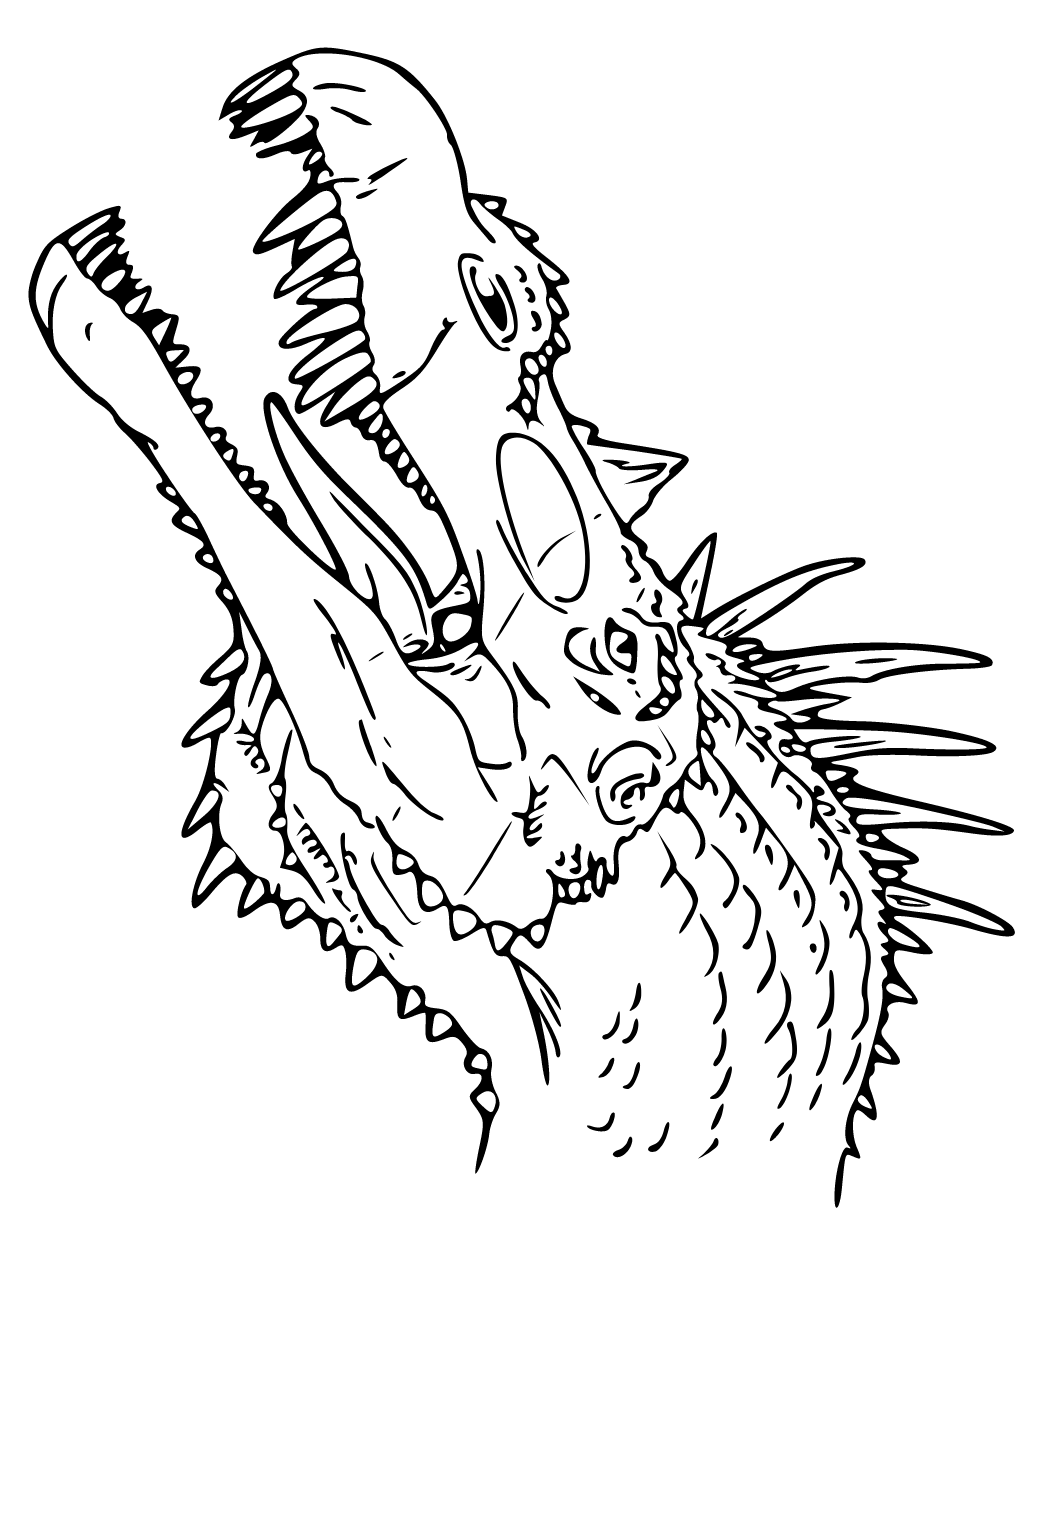 Free printable spinosaurus head coloring page for adults and kids